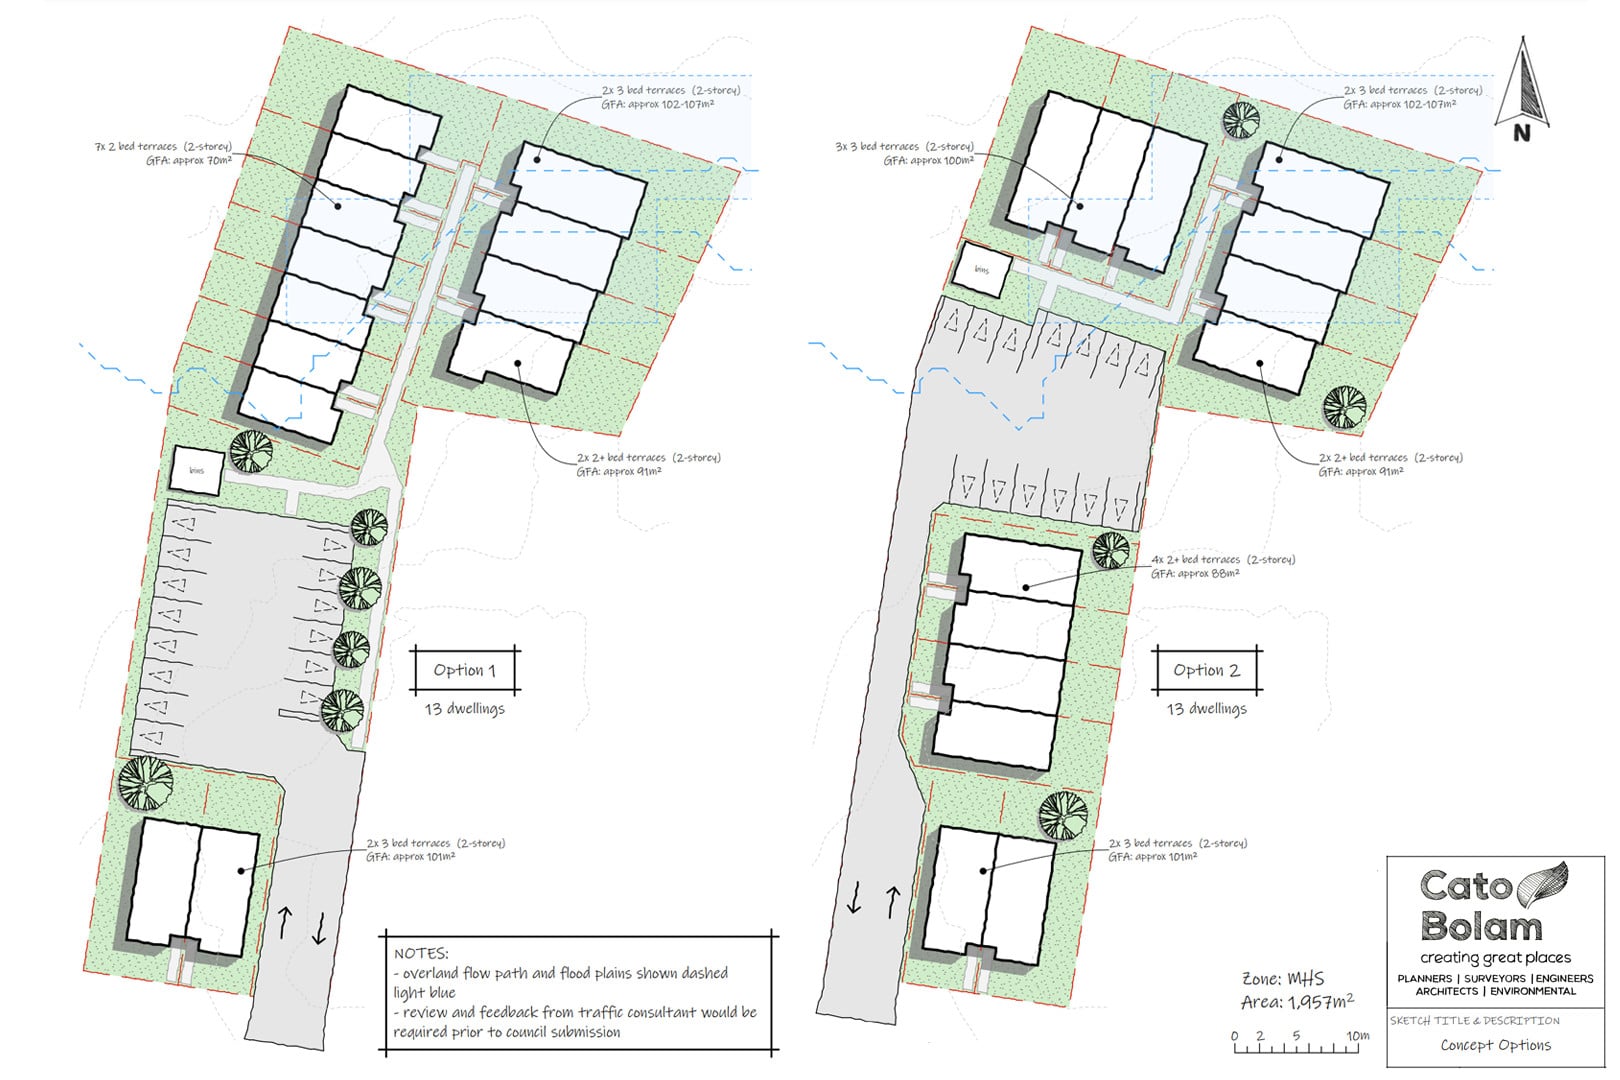 1 Blanes Road MHS - Property Development - The Importance of Initial Development Feasibility and Concept Option Analysis